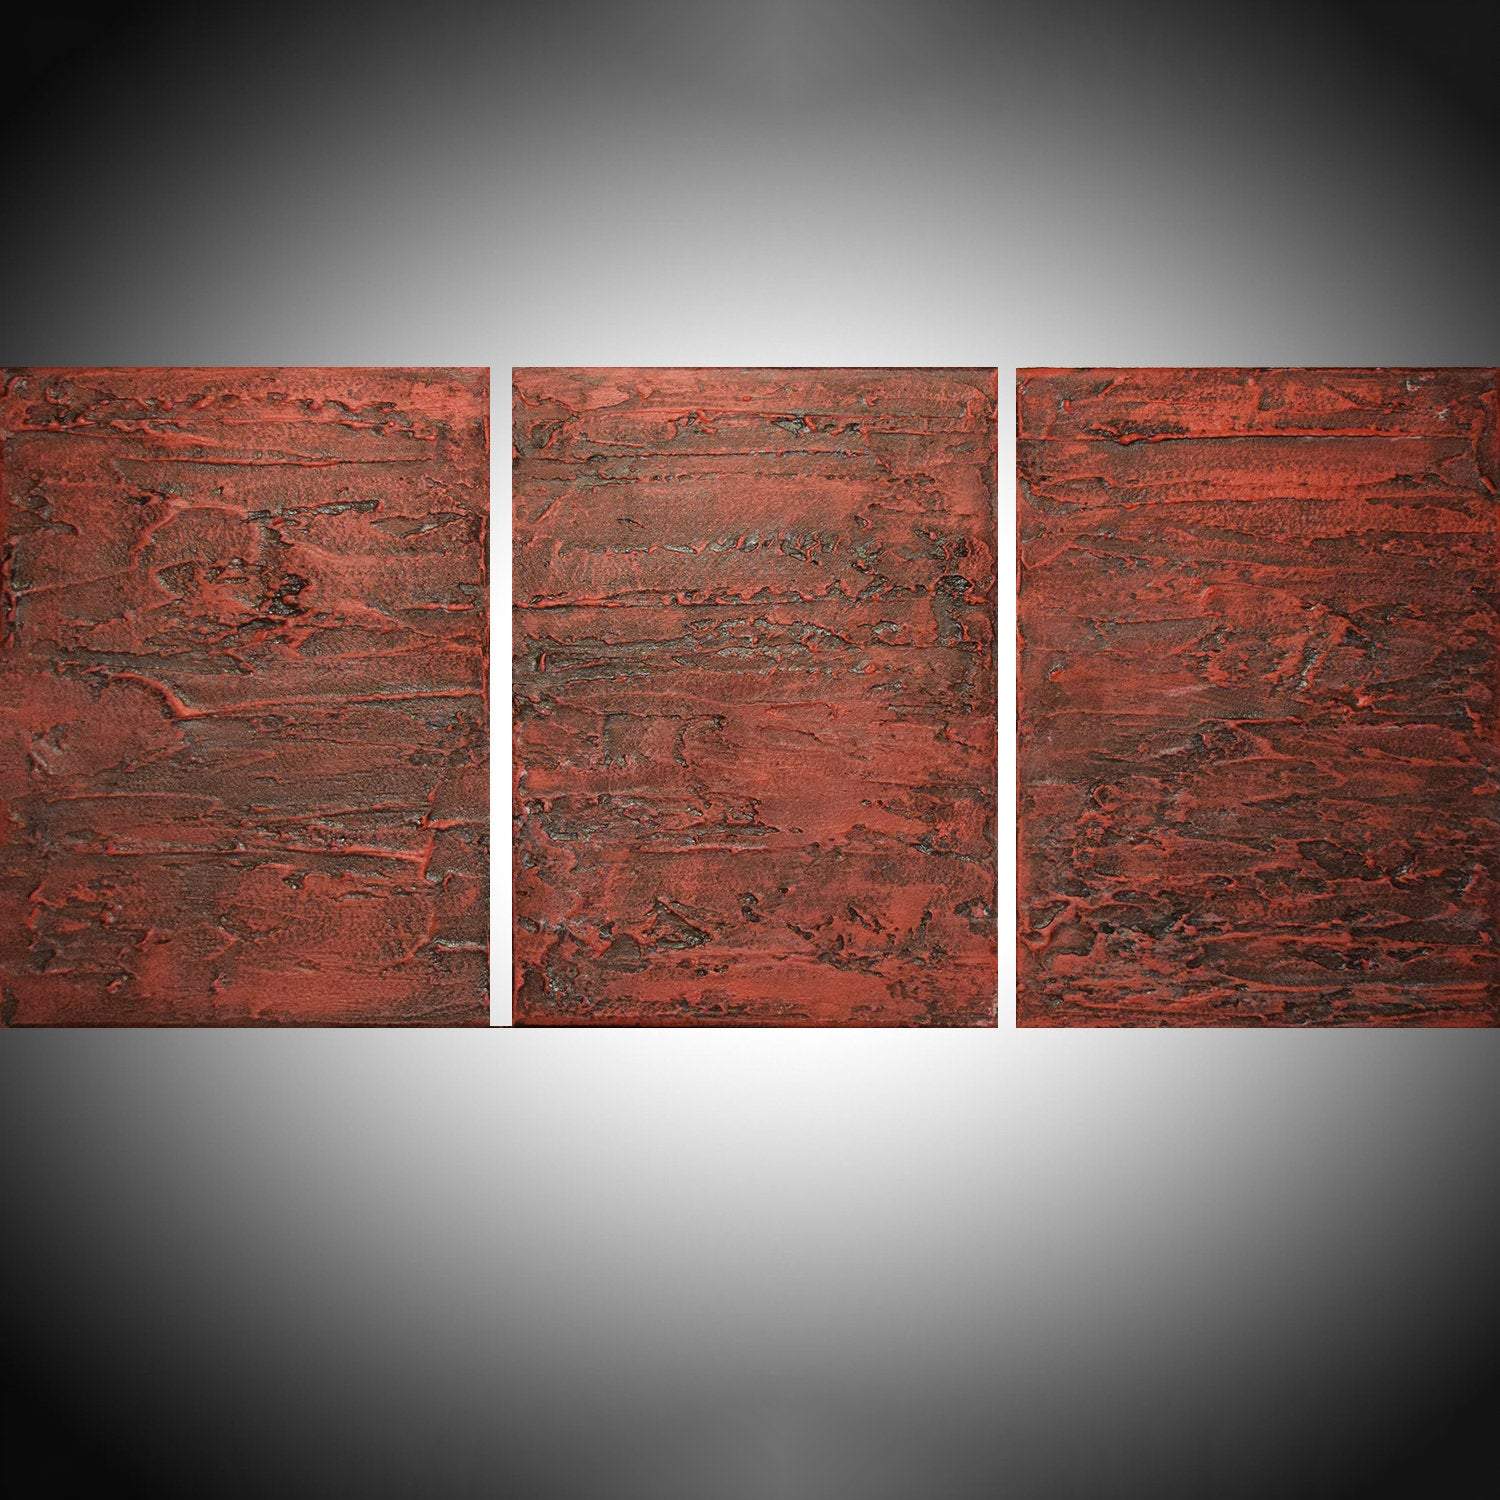 extra LARGE WALL ART triptych 3 panel wall impasto artwork " Red Triptych " canvas original painting abstract canvas wall kunst large sizes